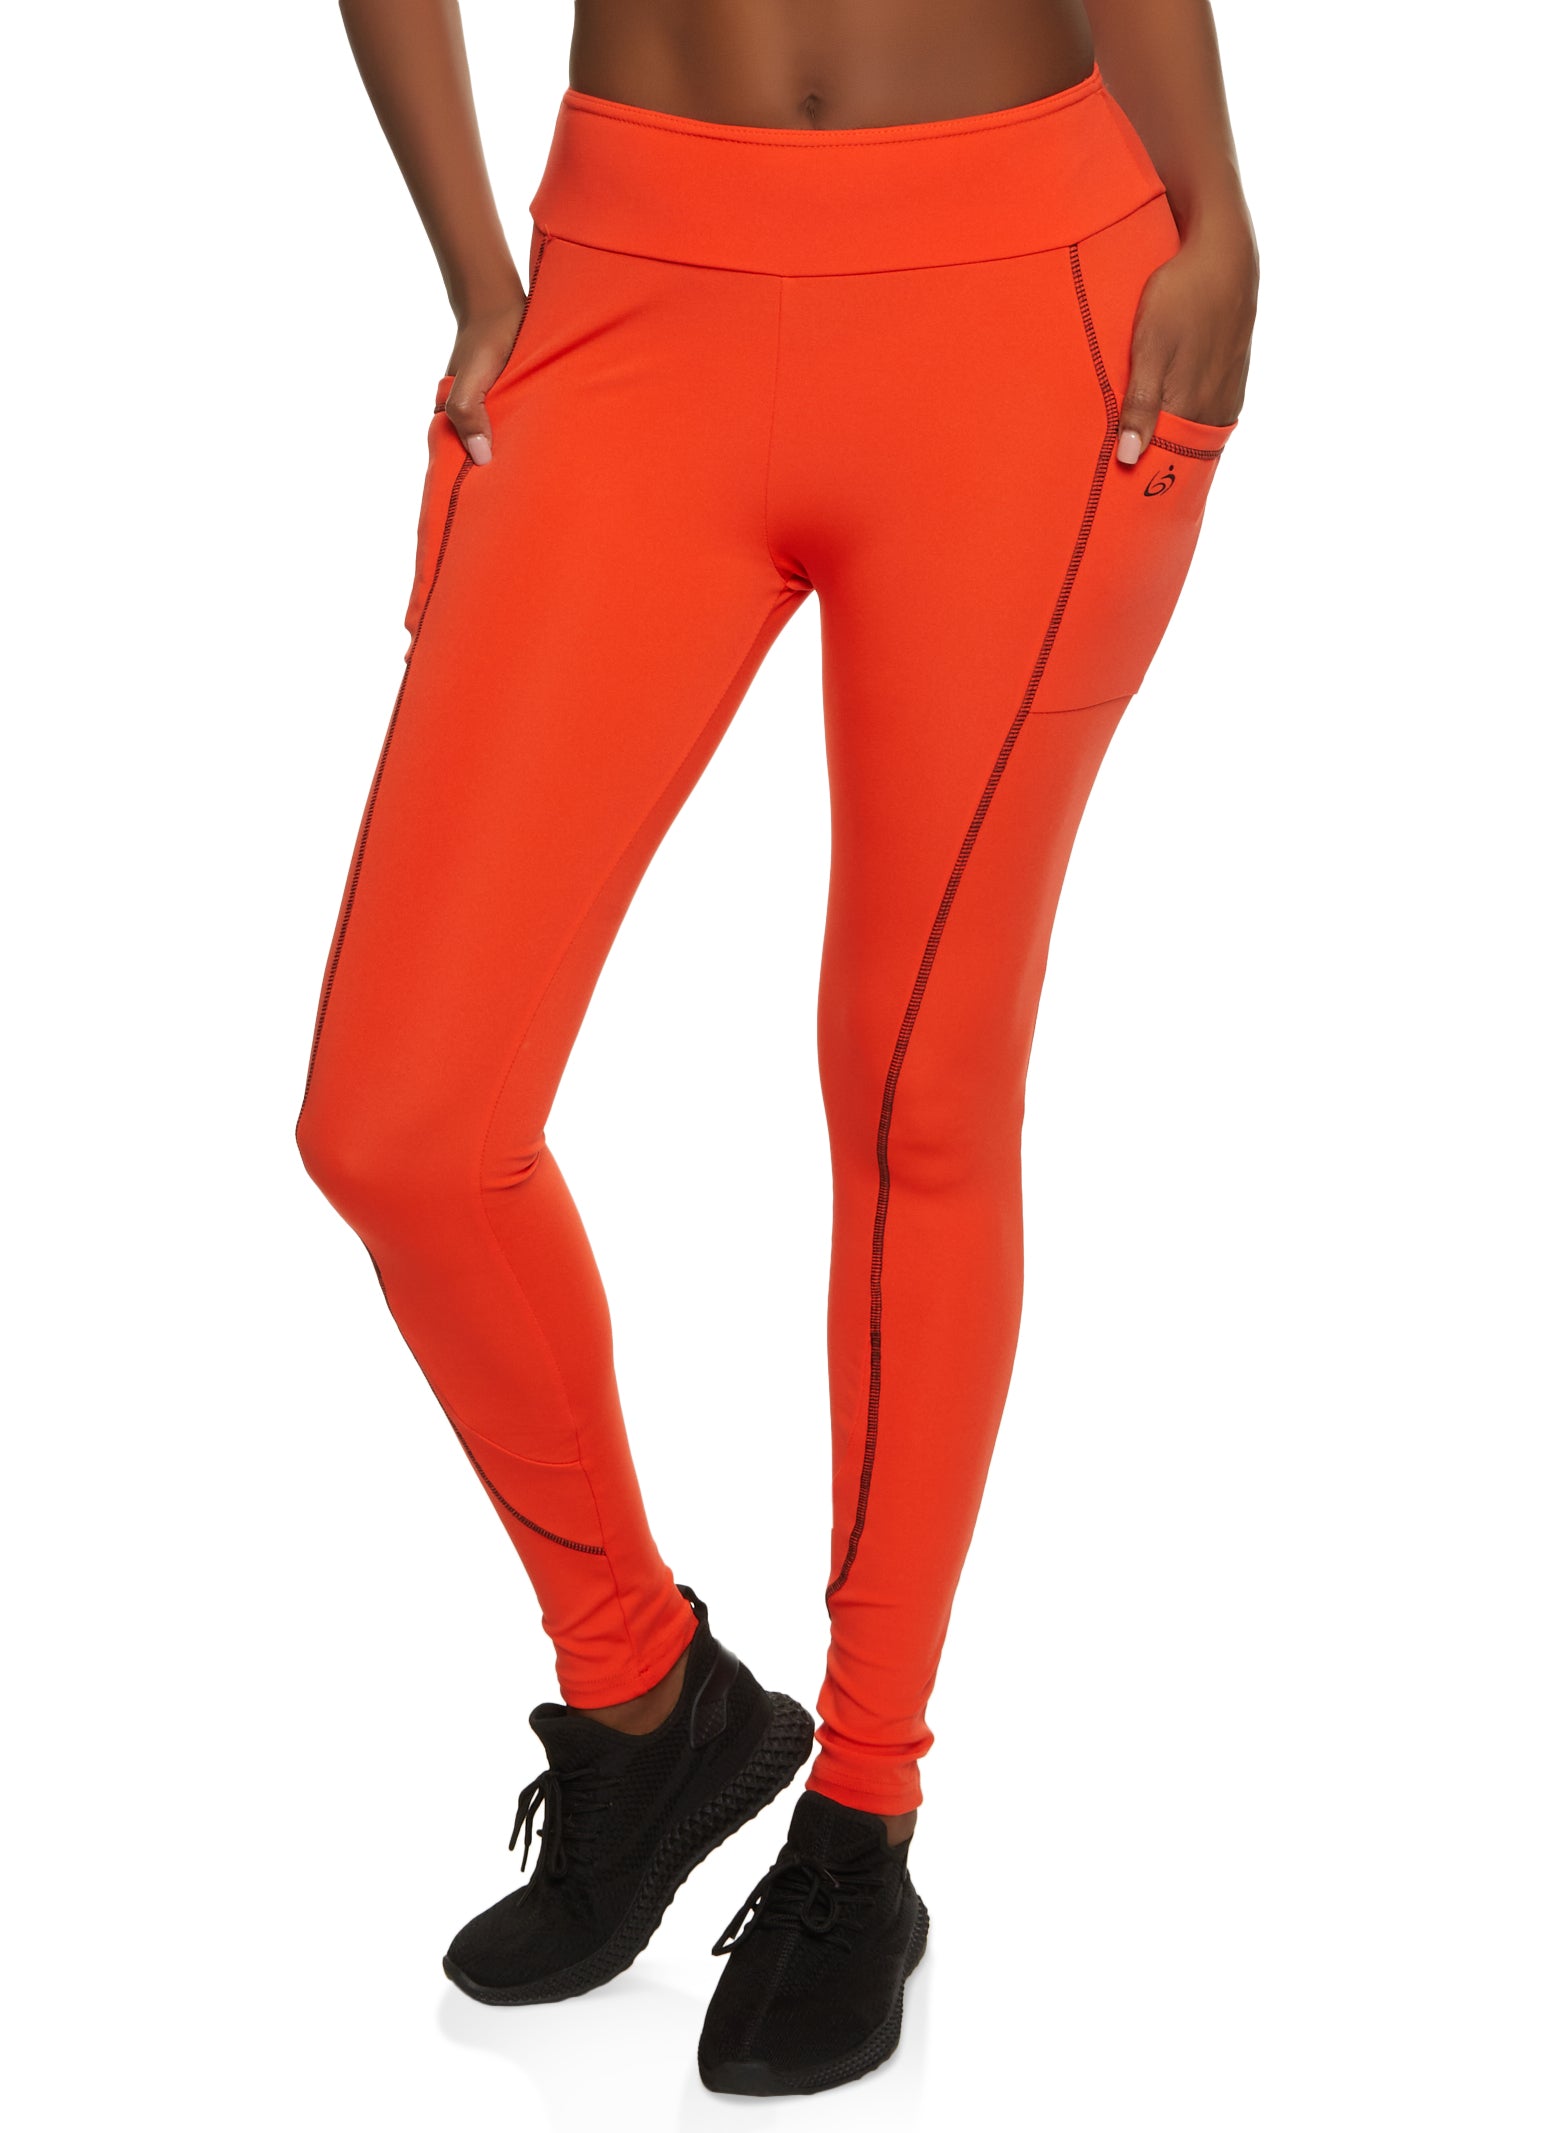 Contrast Stitch Cell Phone Pocket Leggings